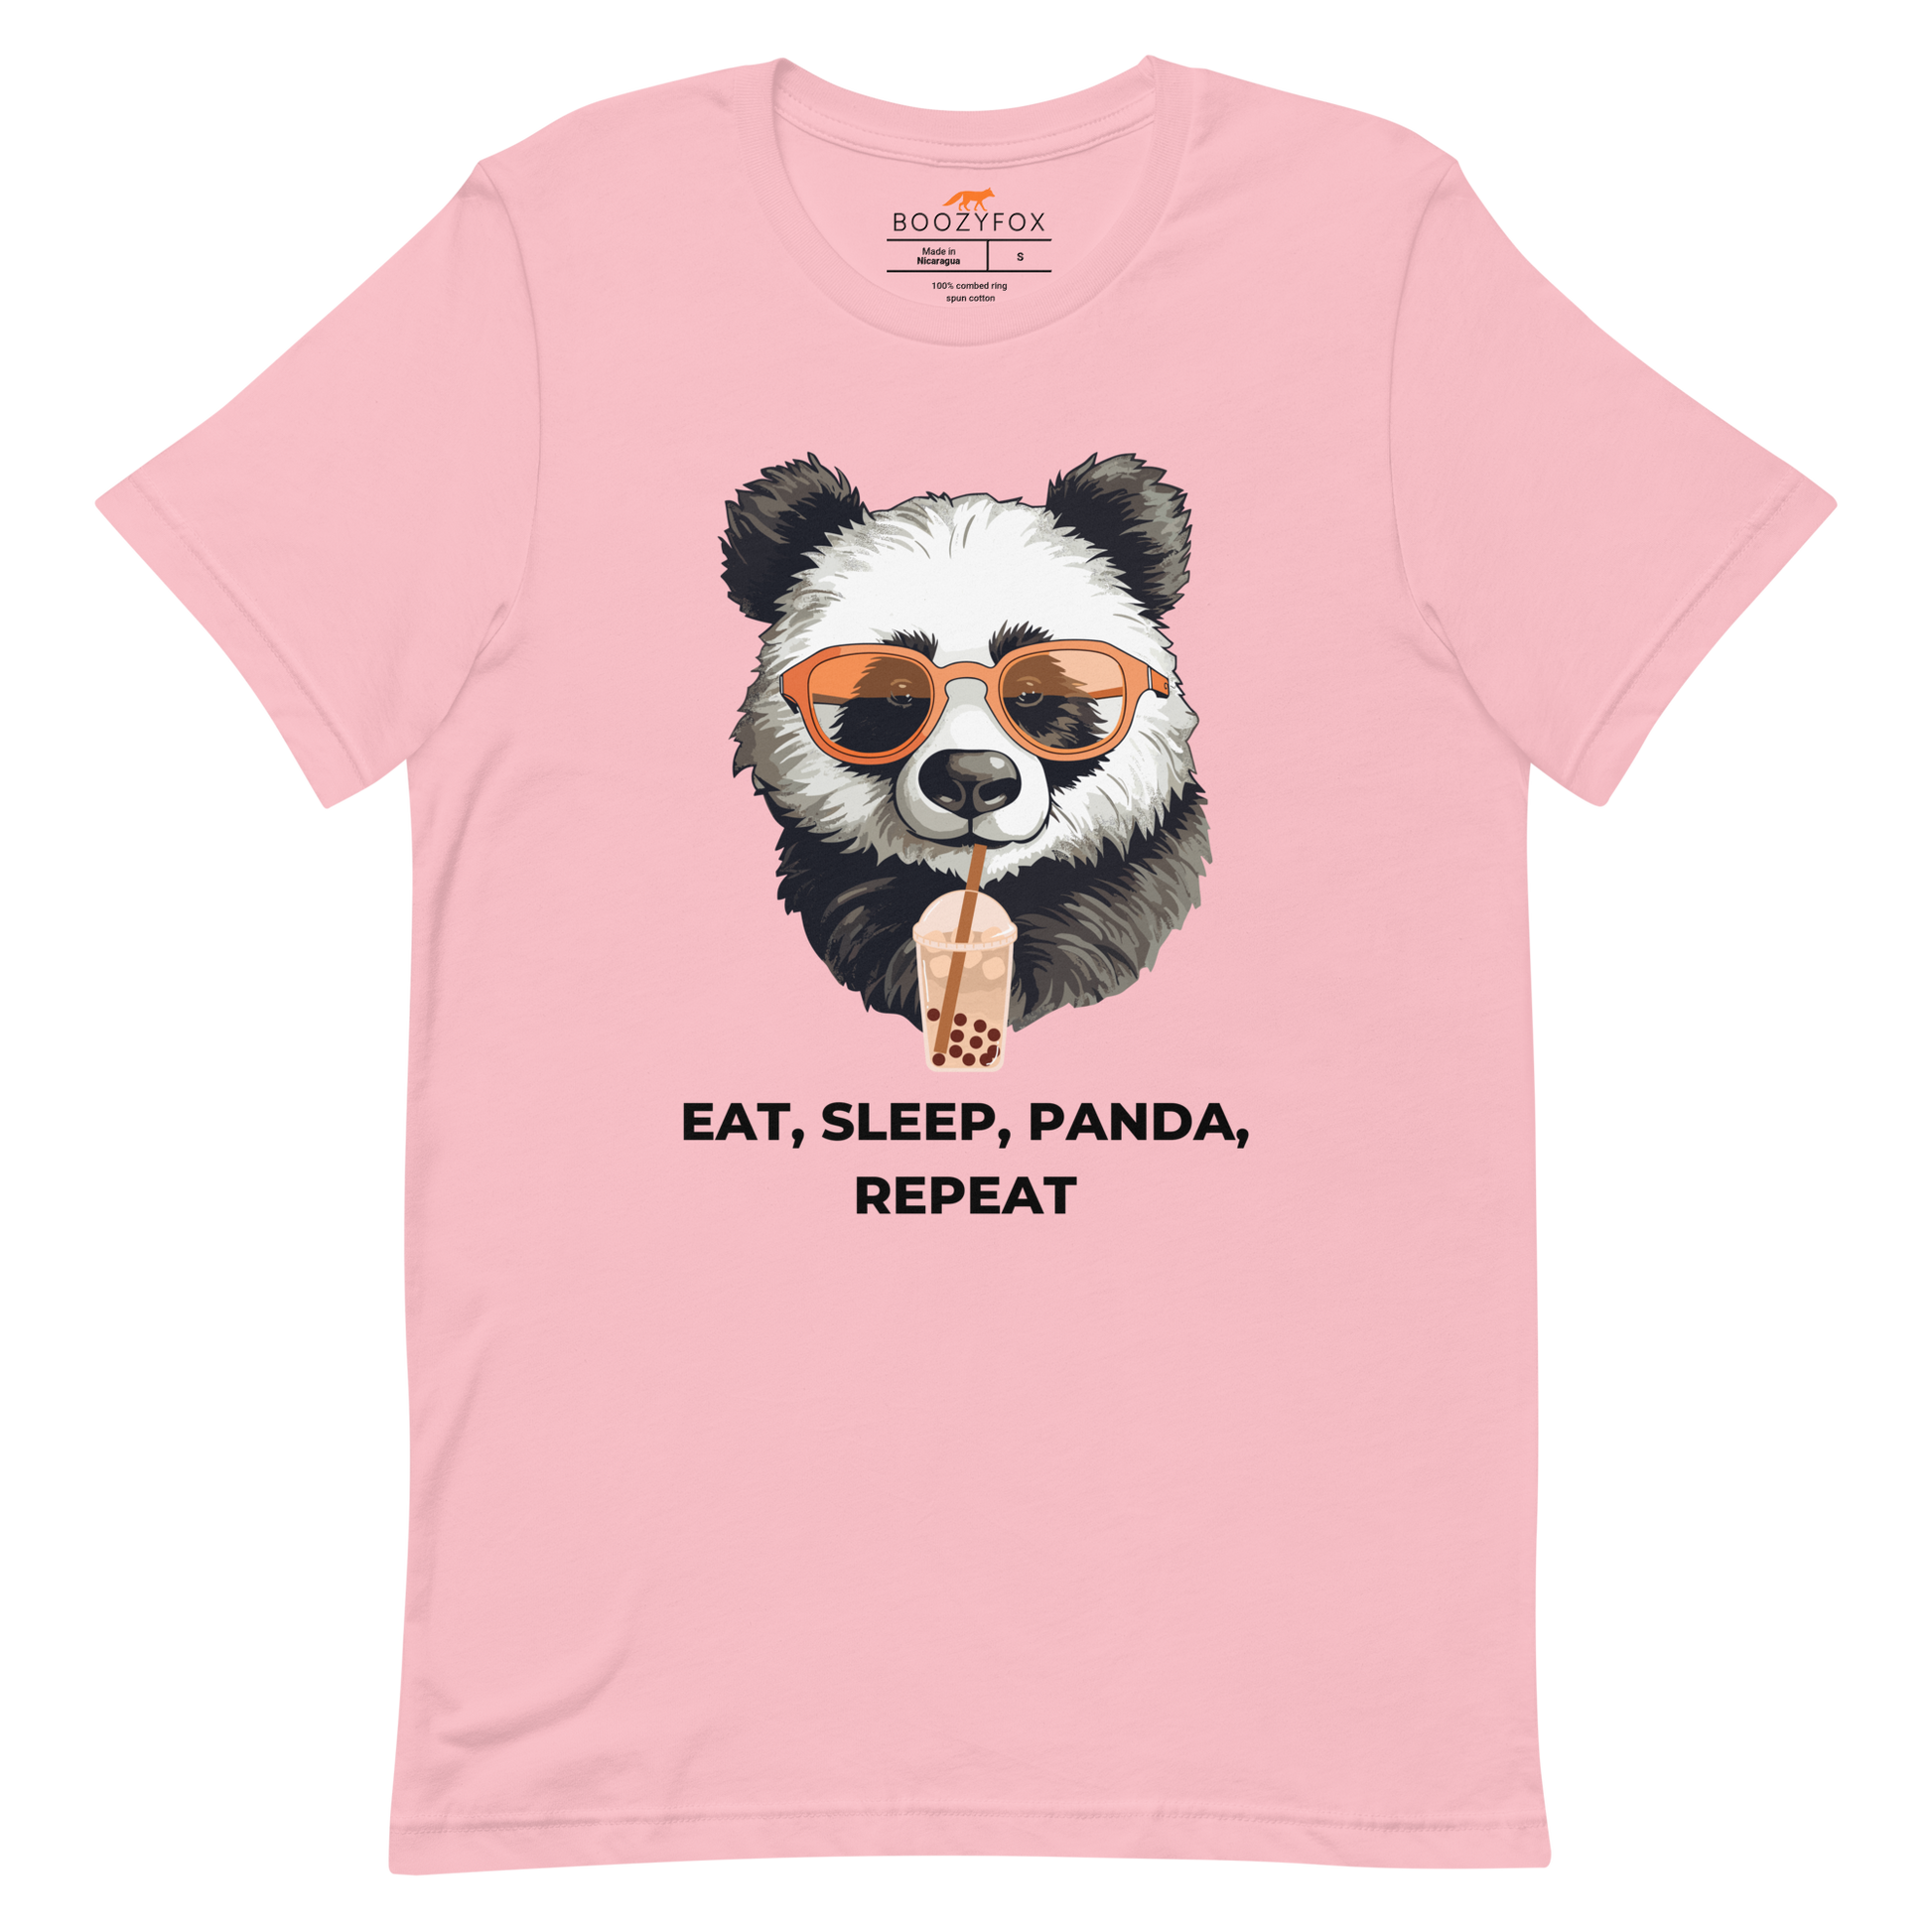 Pink Premium Panda Tee featuring an adorable Eat, Sleep, Panda, Repeat graphic on the chest - Funny Graphic Panda Tees - Boozy Fox